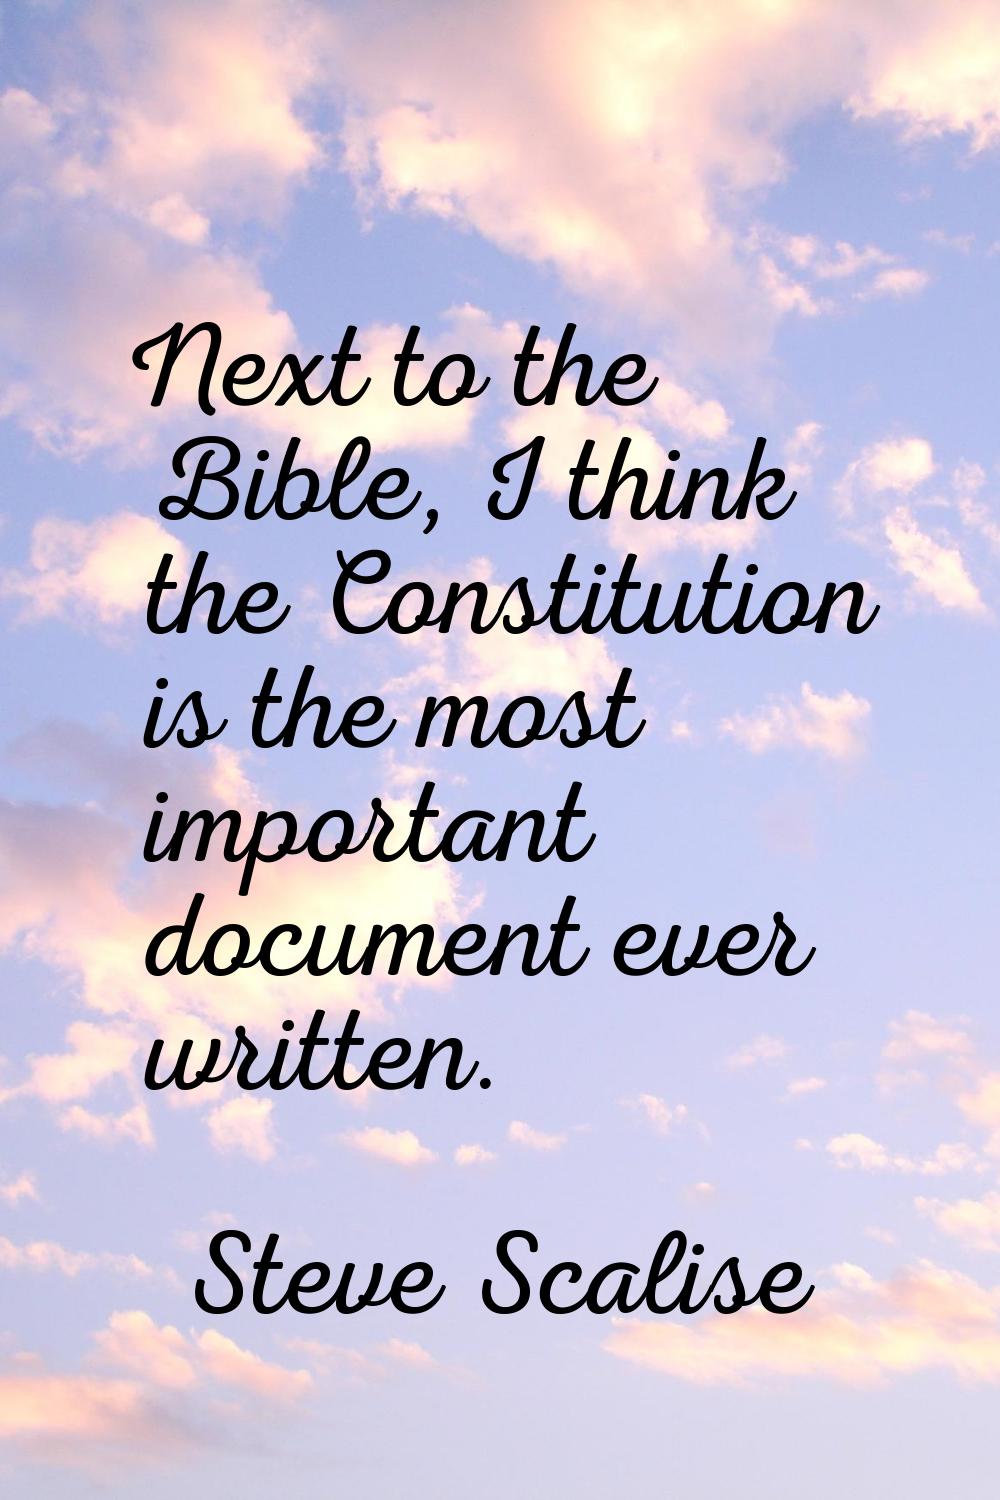 Next to the Bible, I think the Constitution is the most important document ever written.